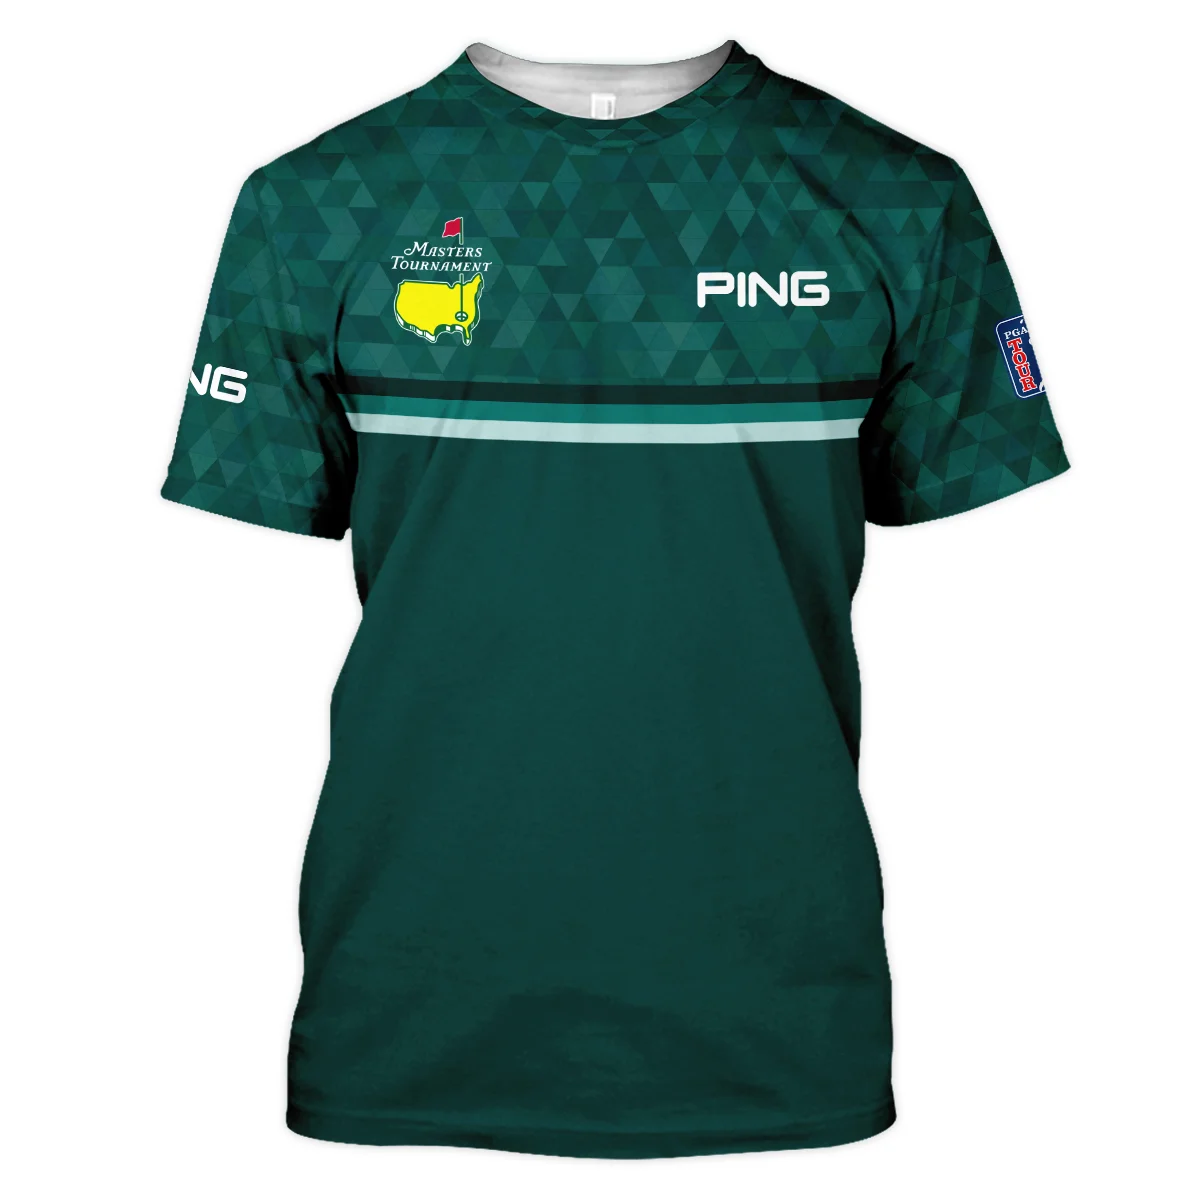 Dark Green Triangle Mosaic Pattern Masters Tournament Ping Vneck Polo Shirt Style Classic Polo Shirt For Men